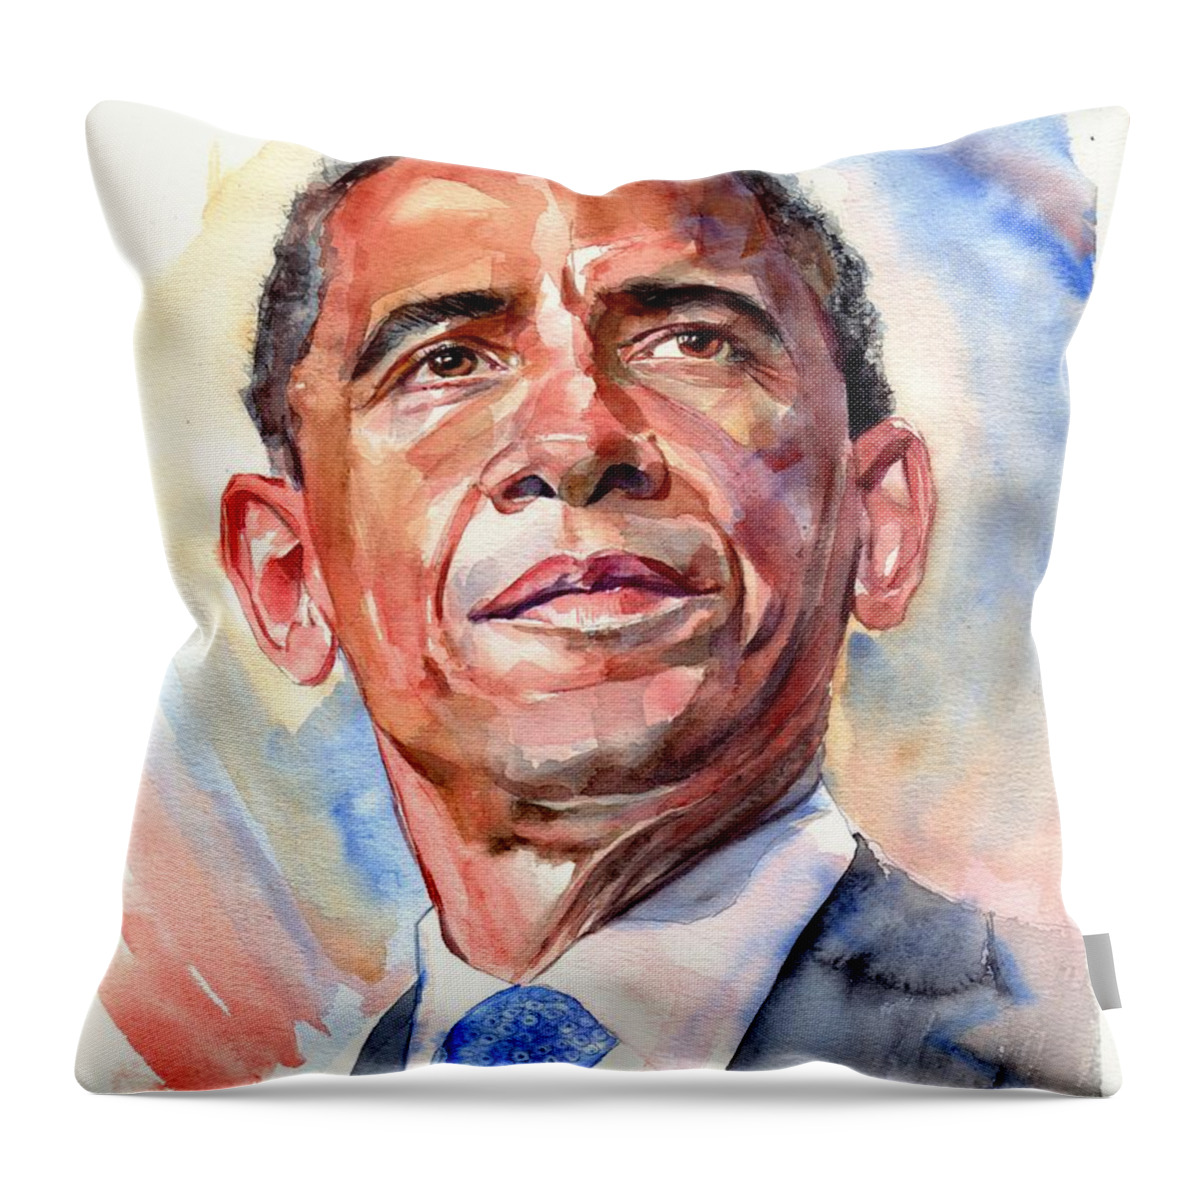 Barack Obama Throw Pillow featuring the painting Barack Obama portrait by Suzann Sines